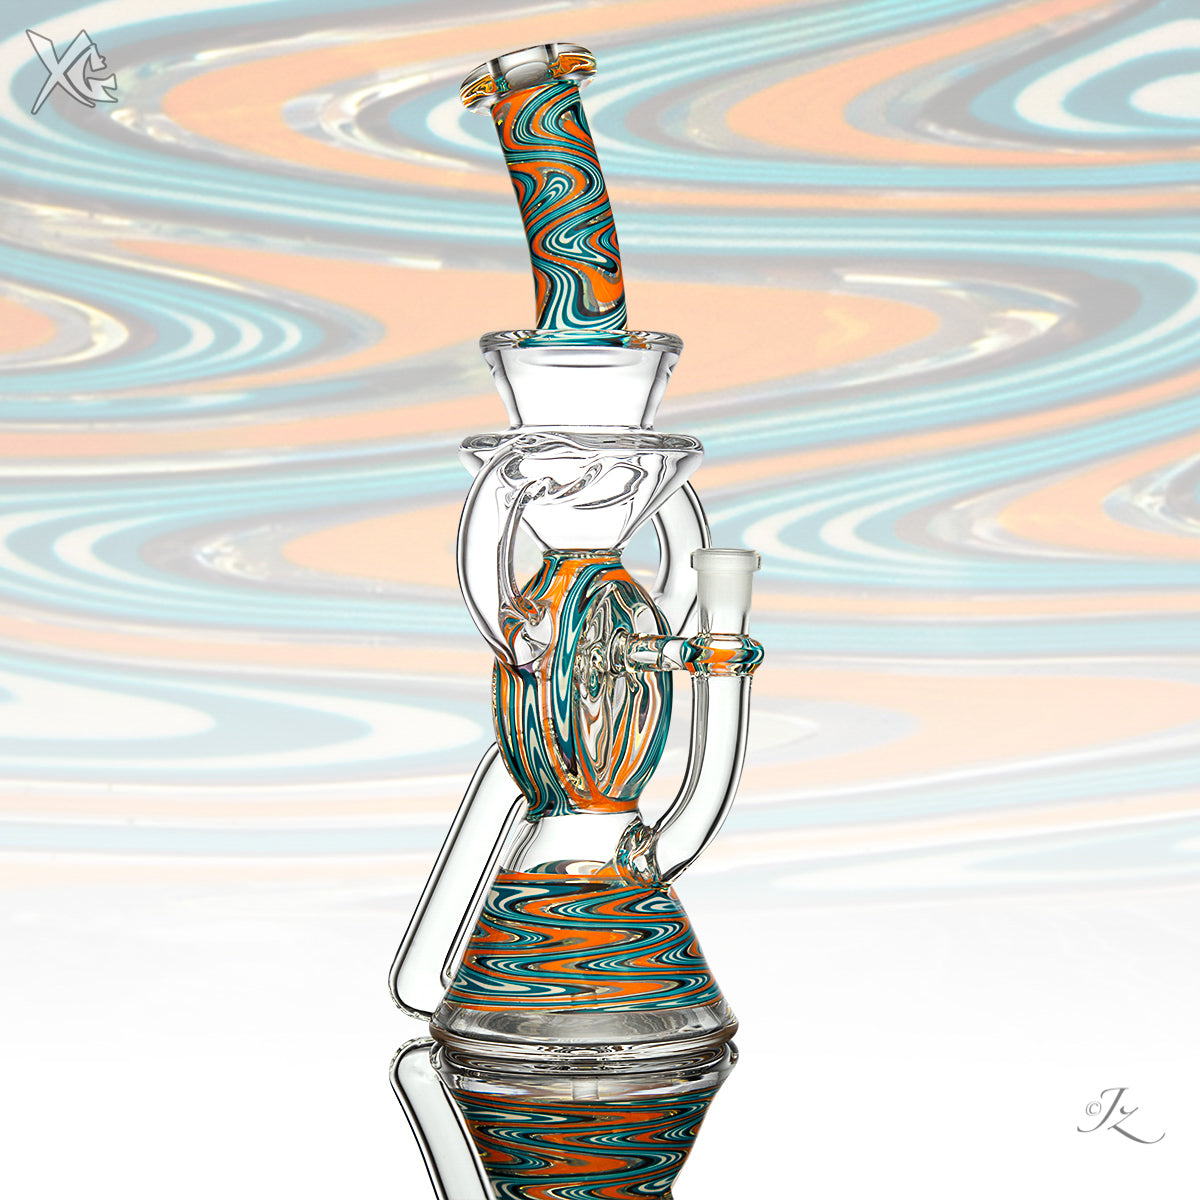 Wig Wag Recycler - A1Glass